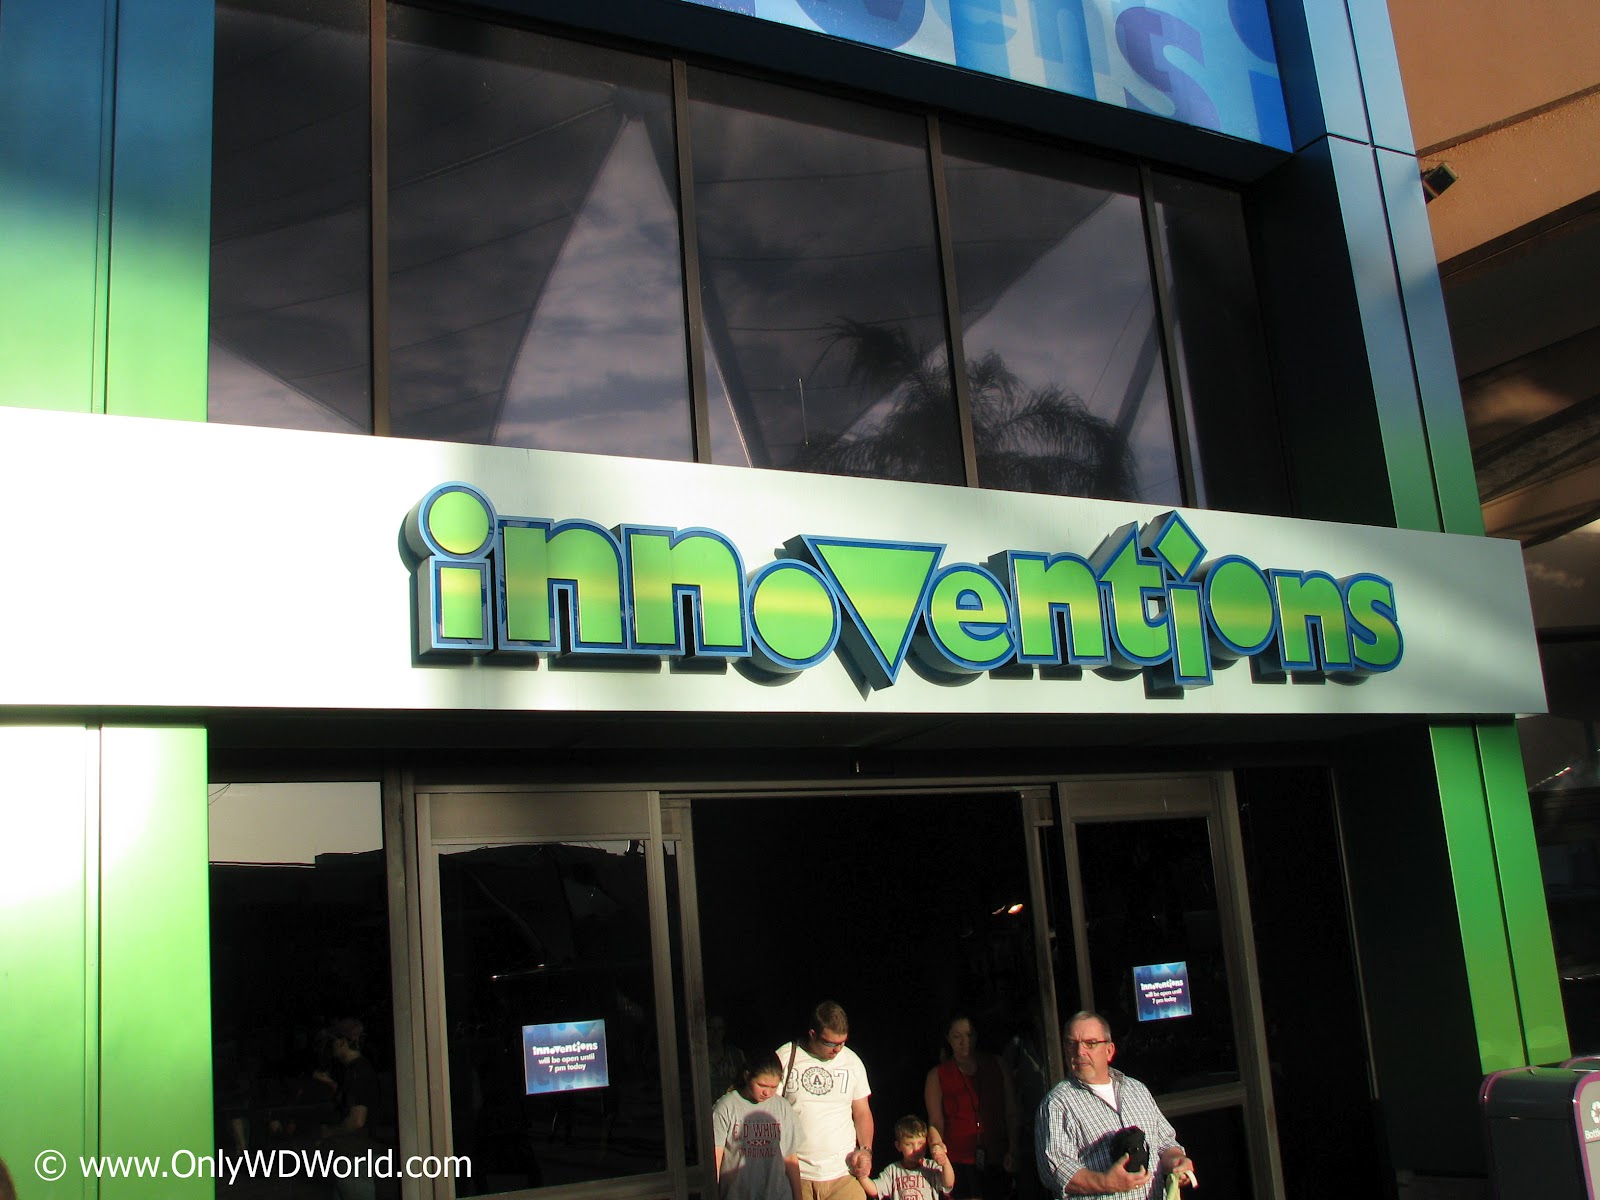 New Epcot Attraction Called Habit Heroes Added To Innoventions | Disney